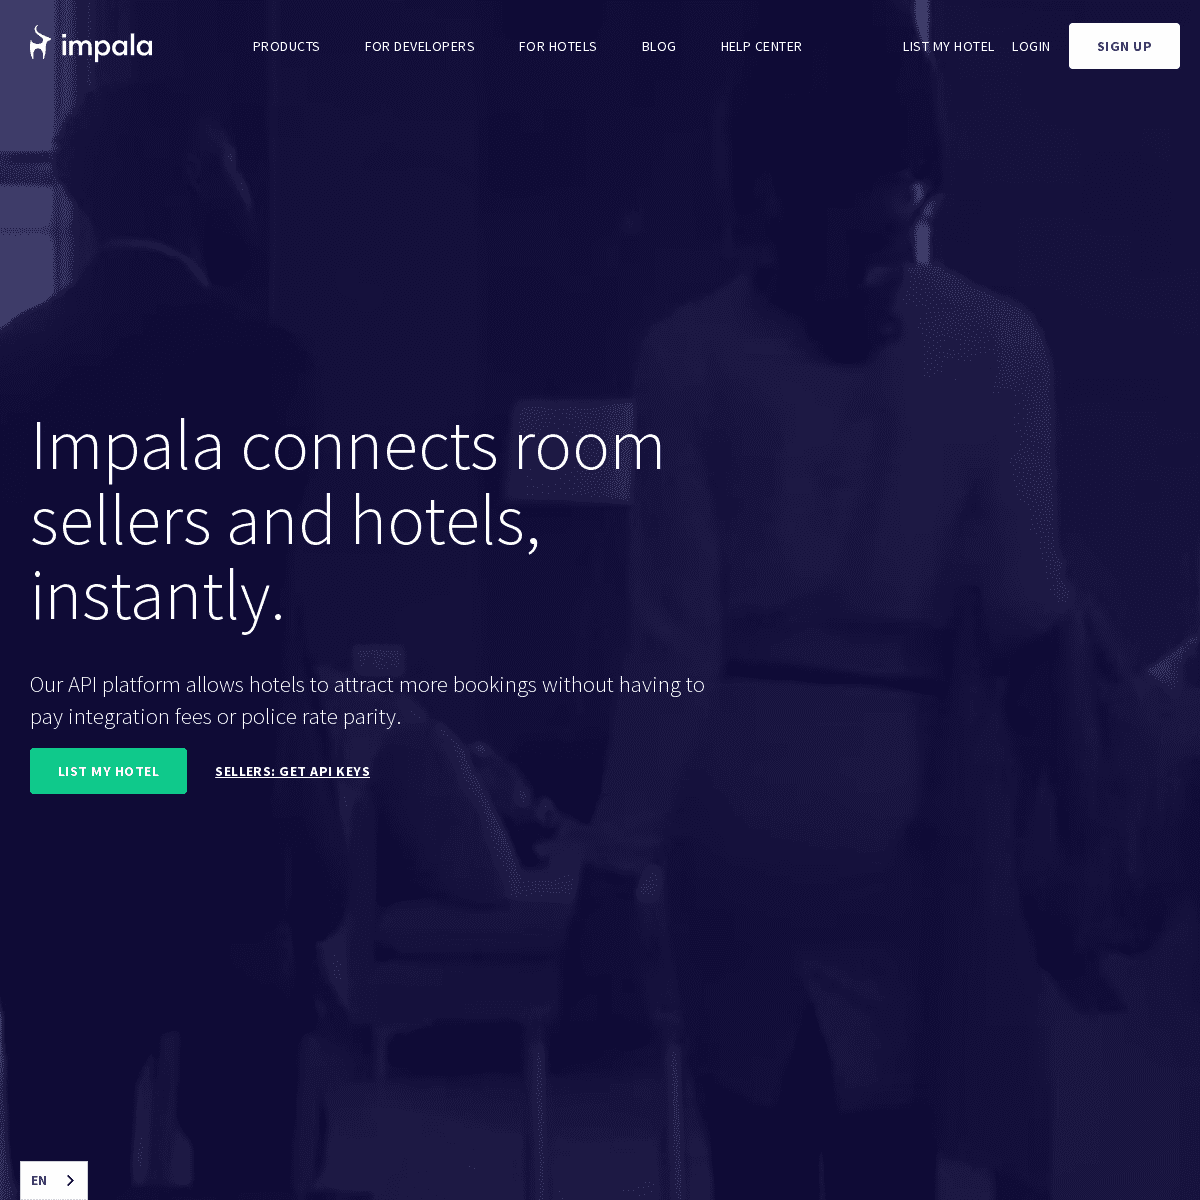 A complete backup of https://impala.travel